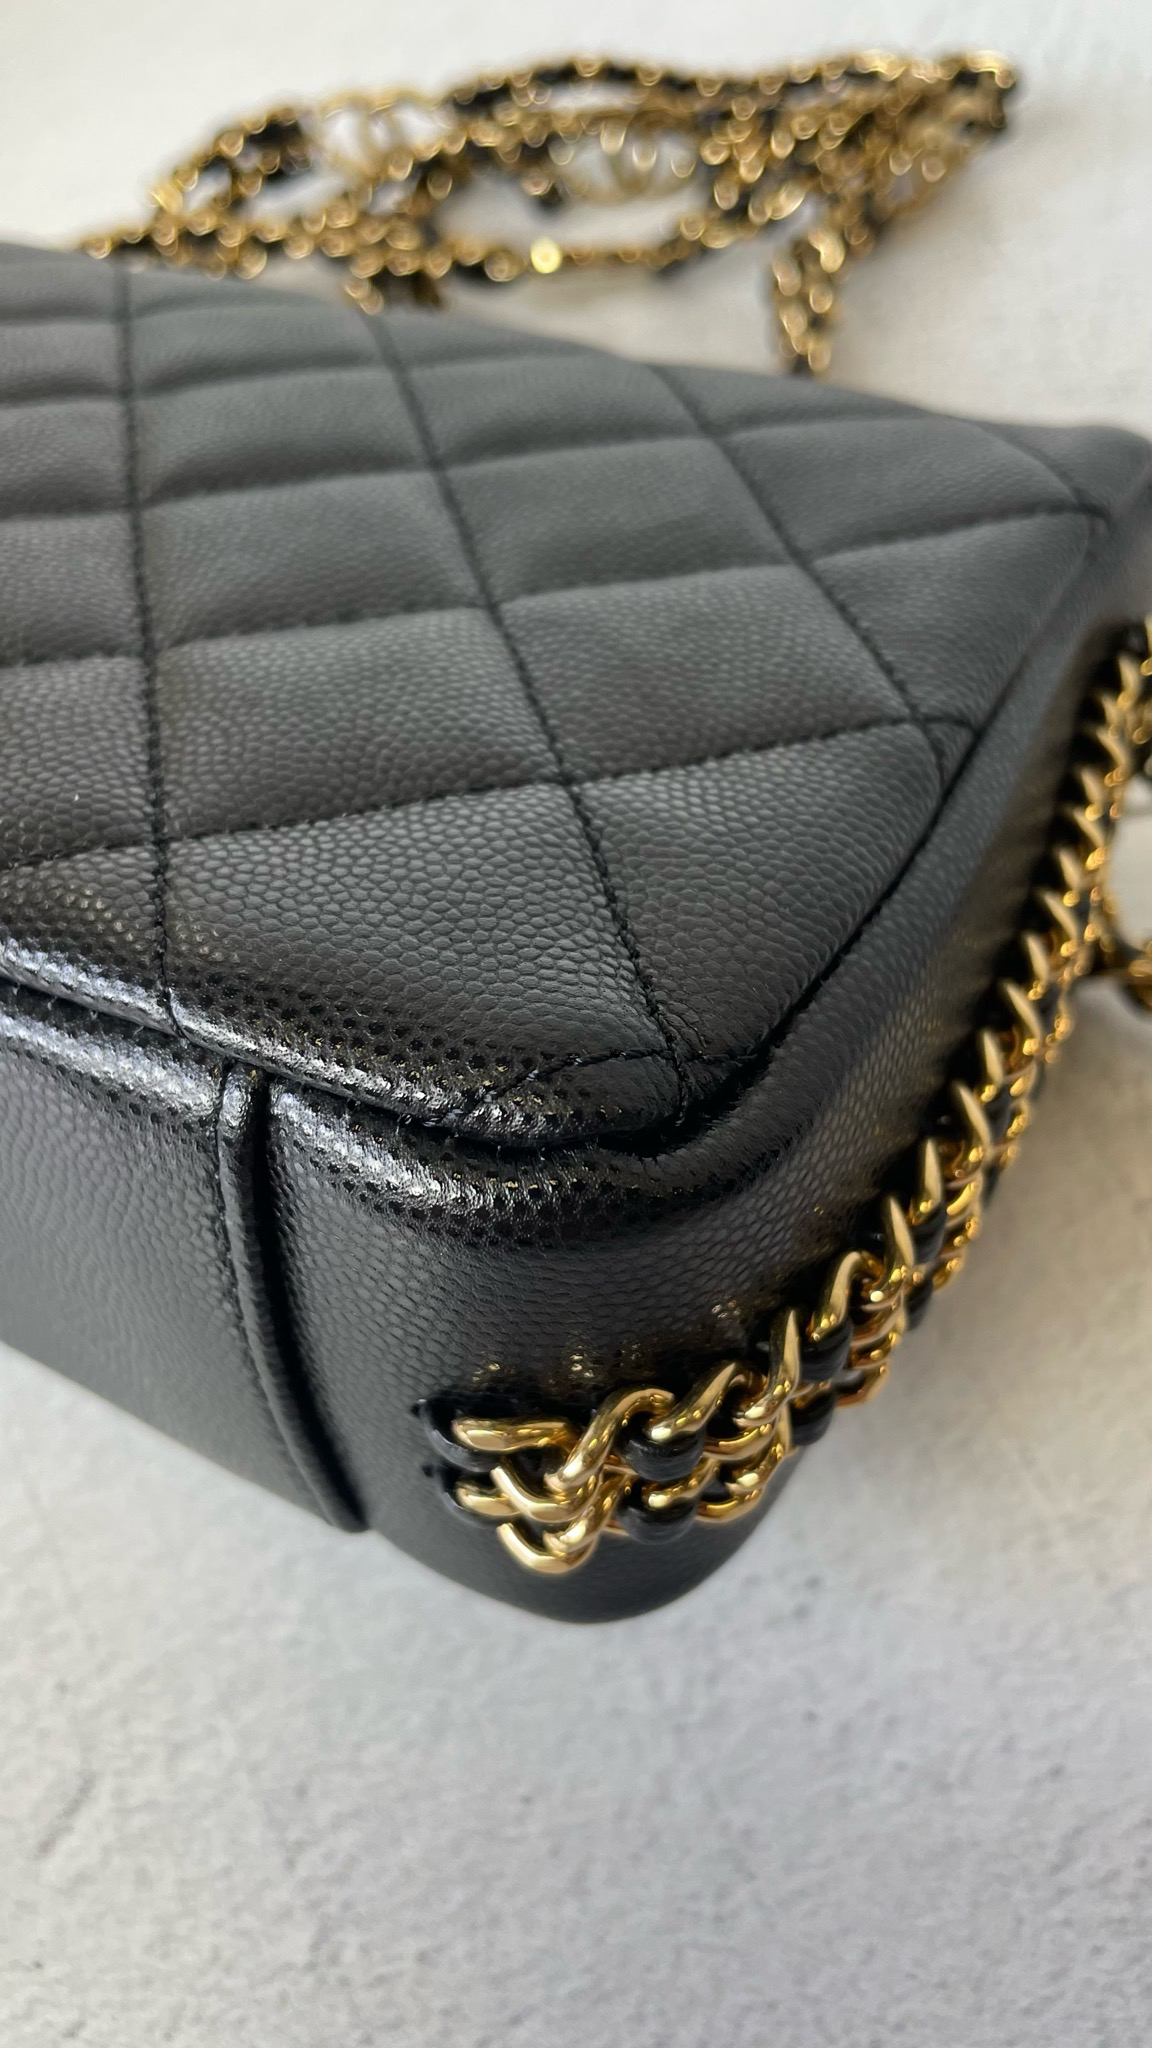 CHANEL 22 SMALL FLAP BAG with GOLD COIN DOUBLE CHAIN STRAP